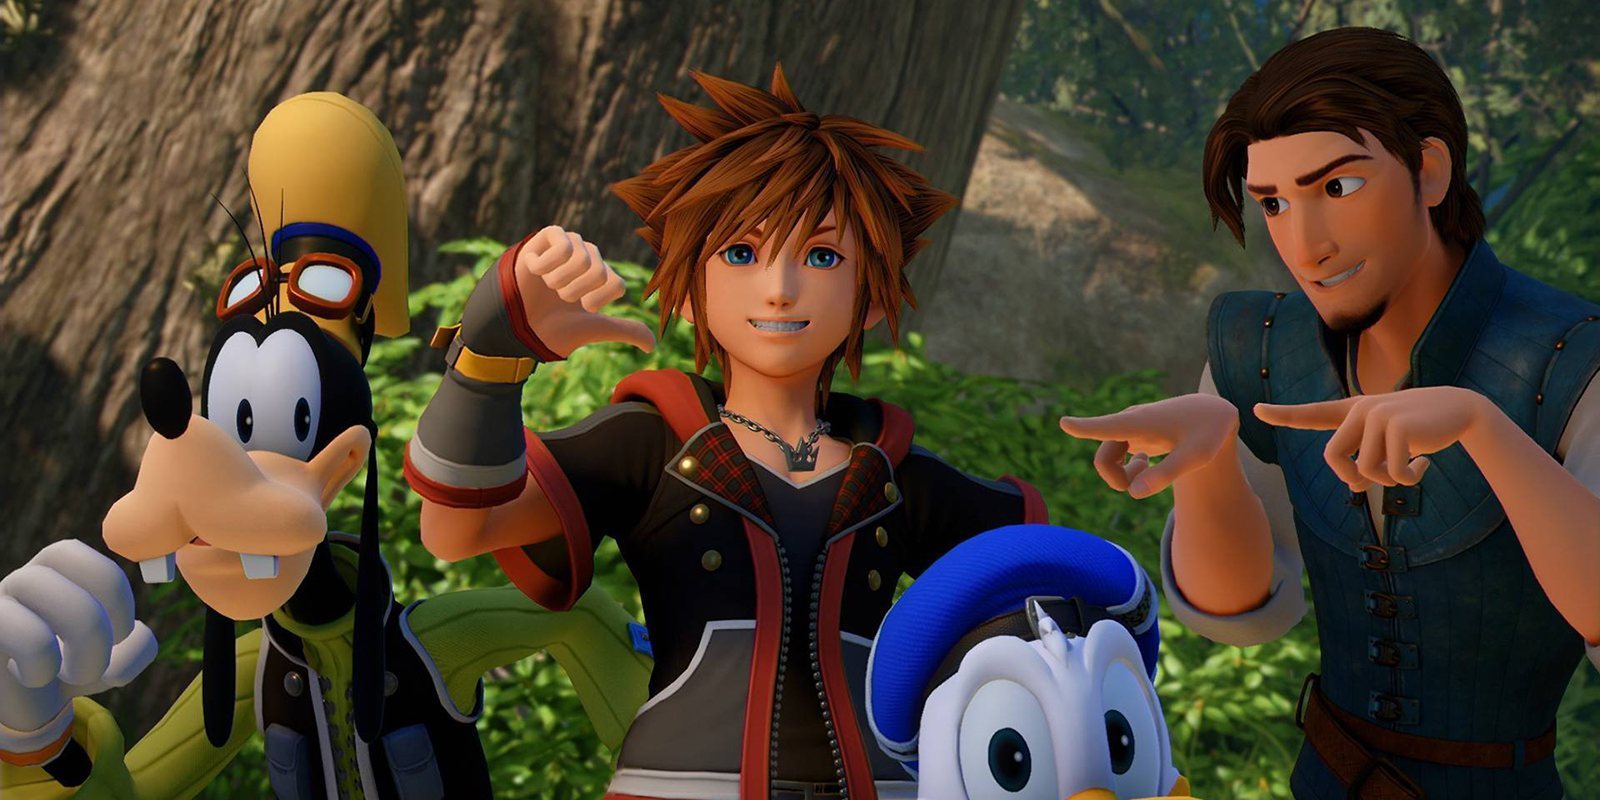 kingdom hearts 3 amazon deluxe sold out?